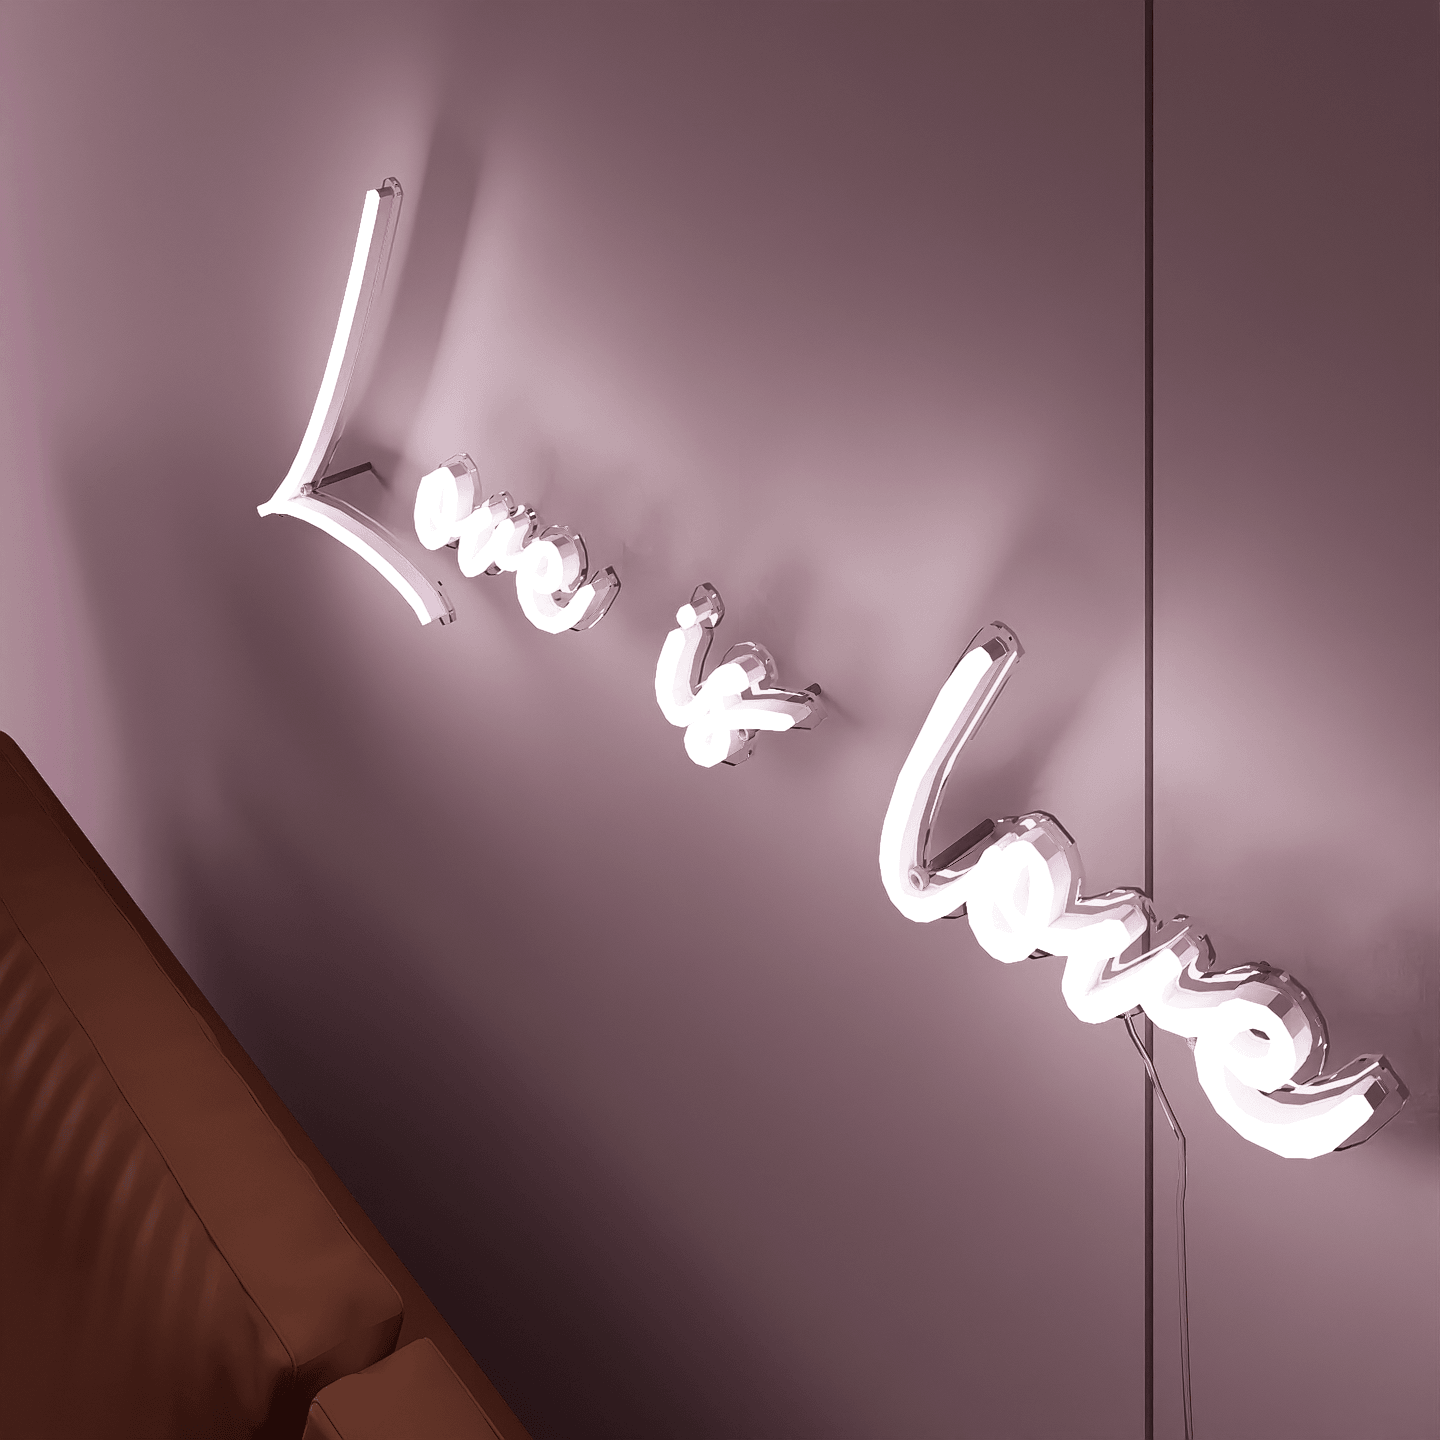 side-shot-of-lit-white-neon-lights-hanging-on-wall-for-display-love-is-love